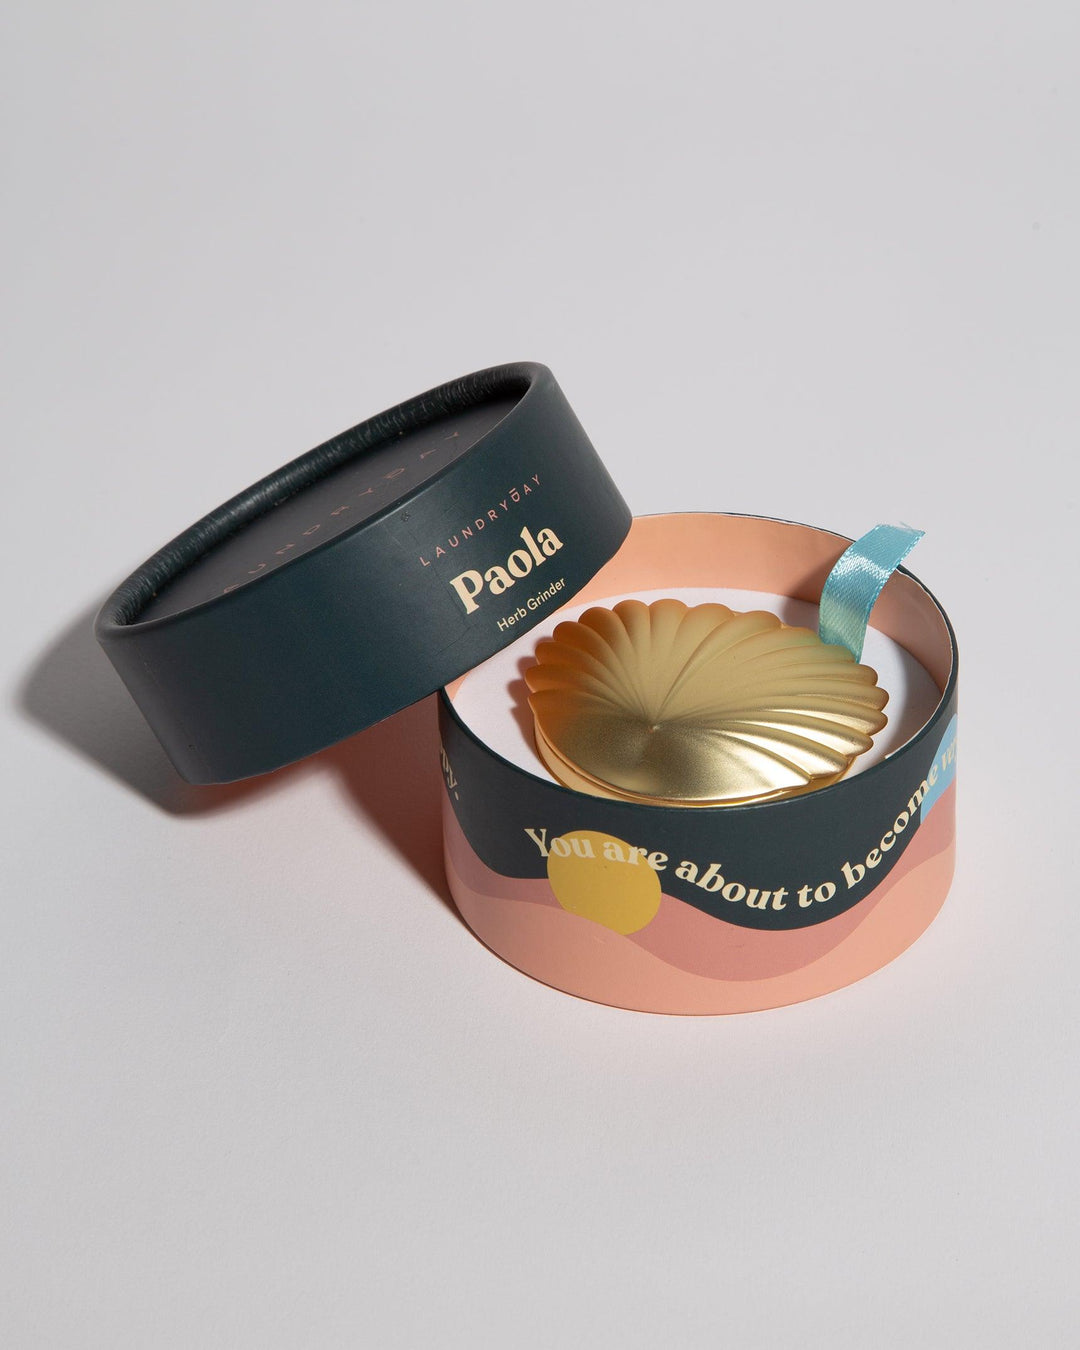 cute seashell grinder for cannabis weed